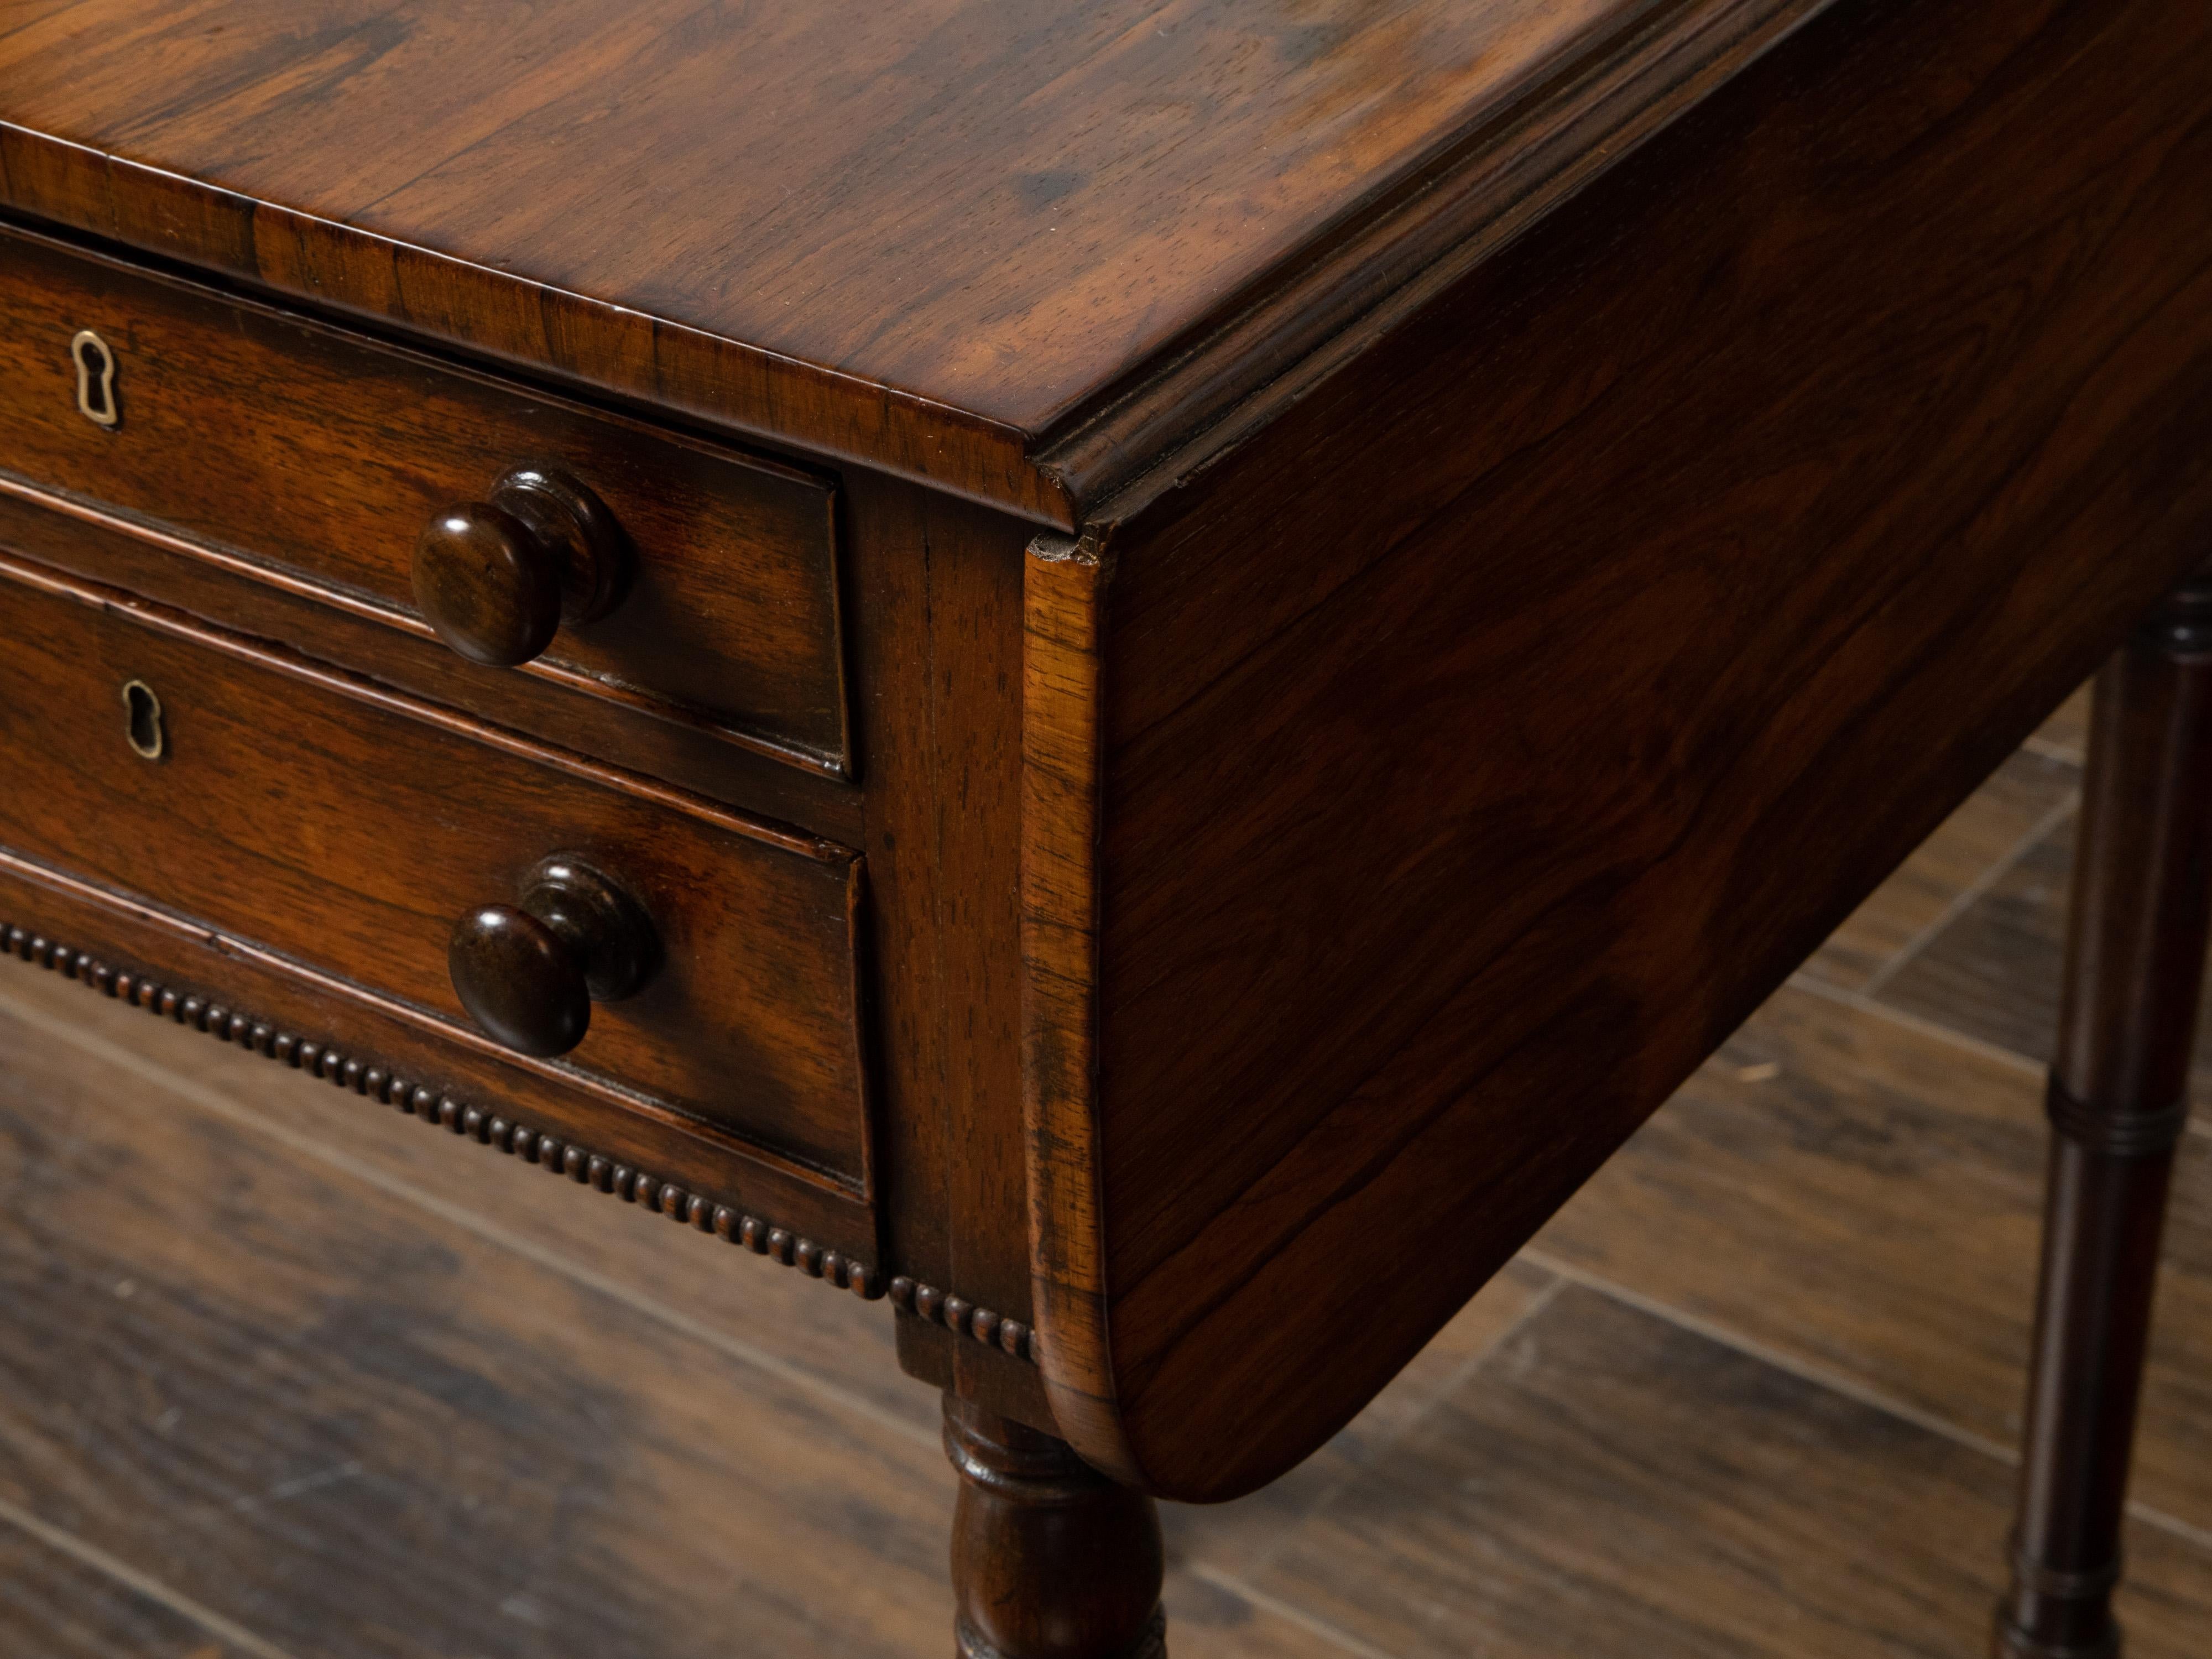 English Regency 1820s Mahogany Pembroke Table with Drop Leaves and Drawers For Sale 6